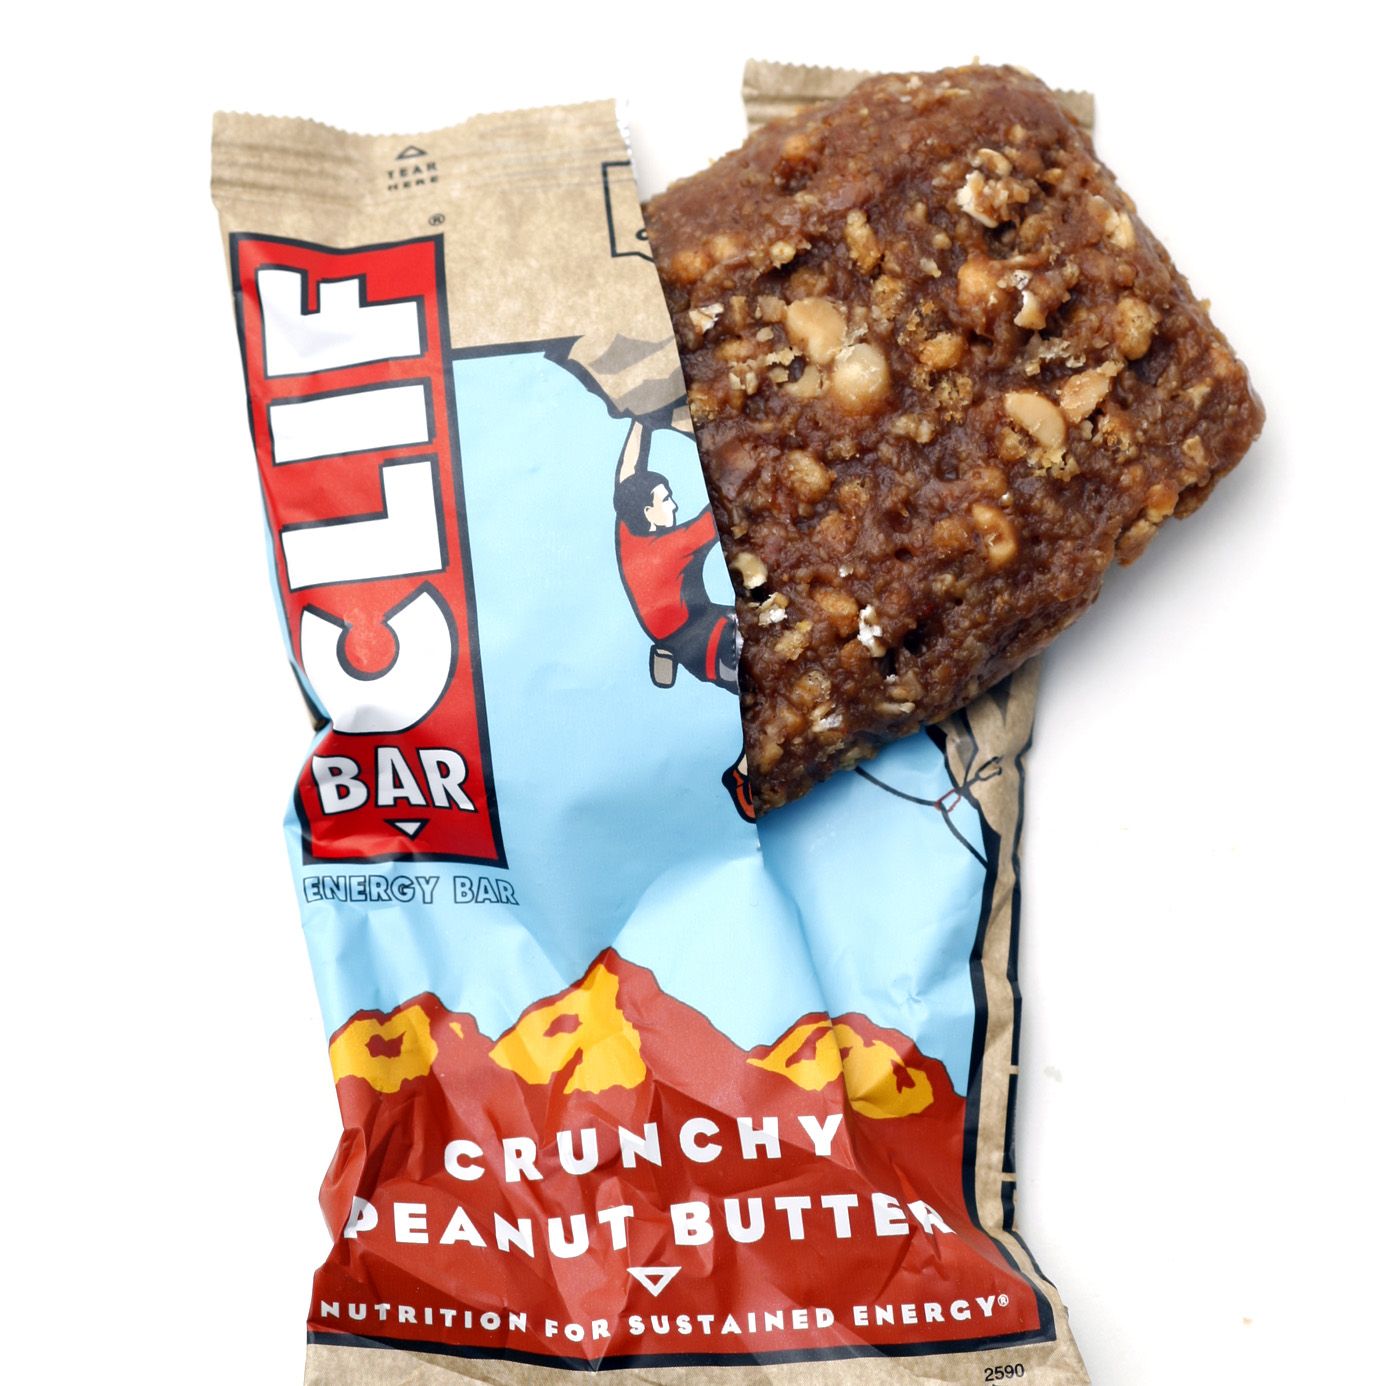 Crunchy peanut butter "Clif bar" photographed in the studio of the Los Angeles Times on September 1